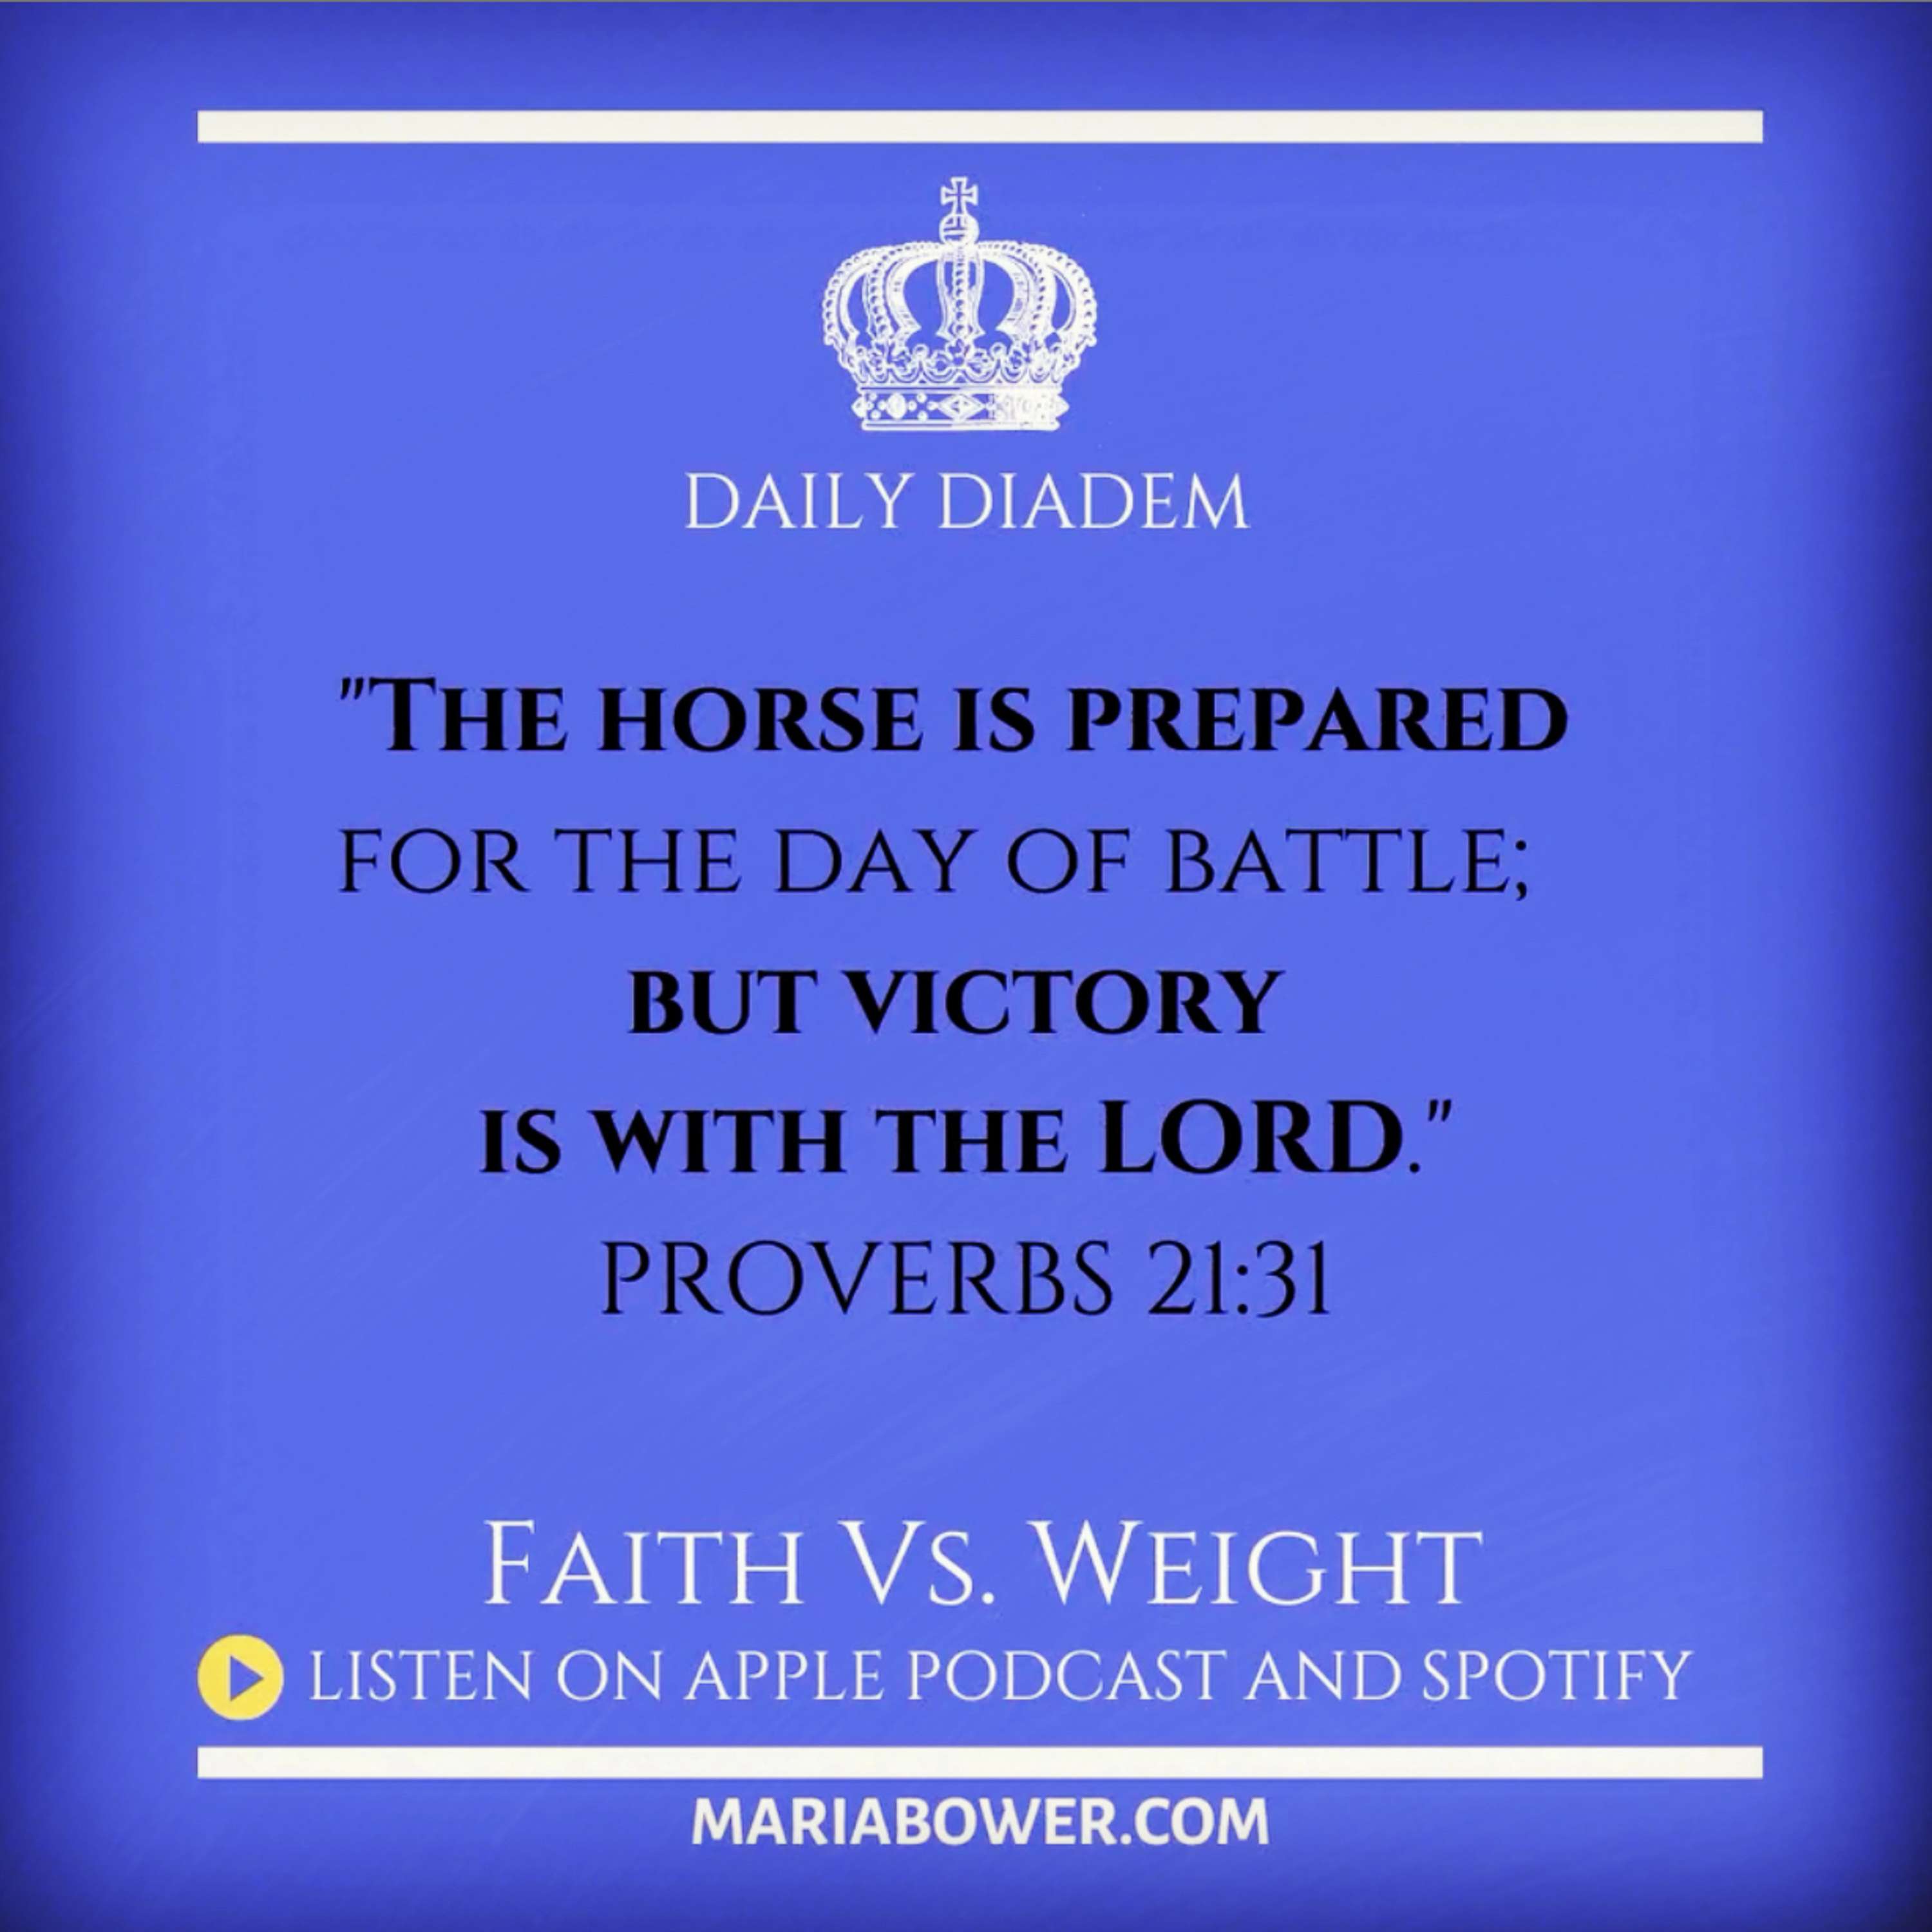 DAILY DIADEM:  HOW TO OBTAIN VICTORY